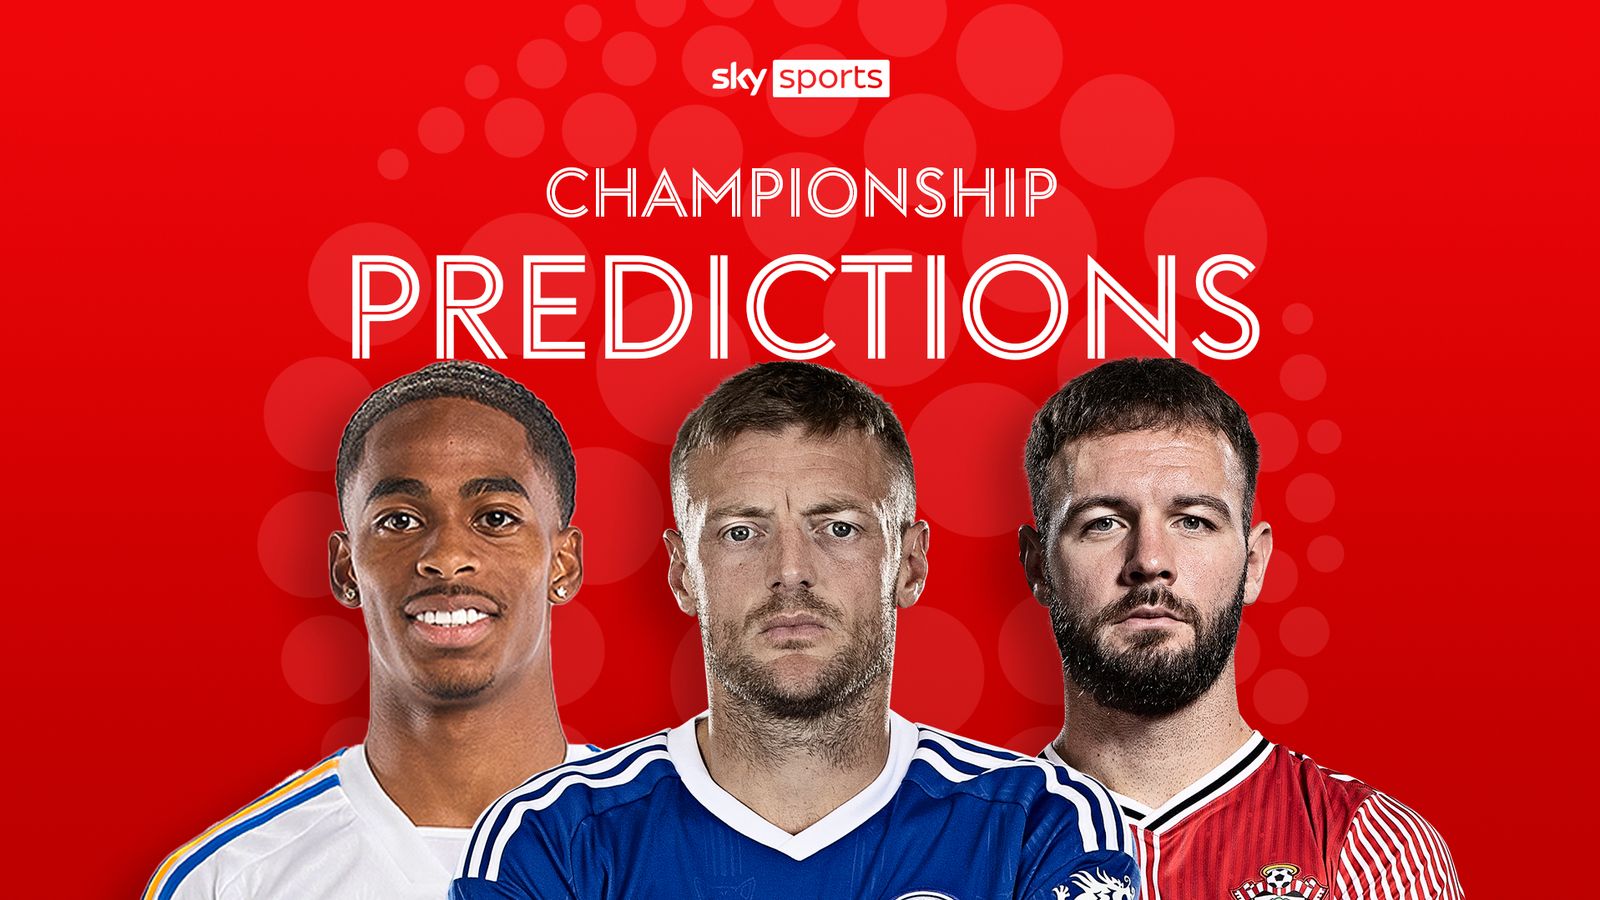 Championship predictions: Southampton to win again | More Millwall misery